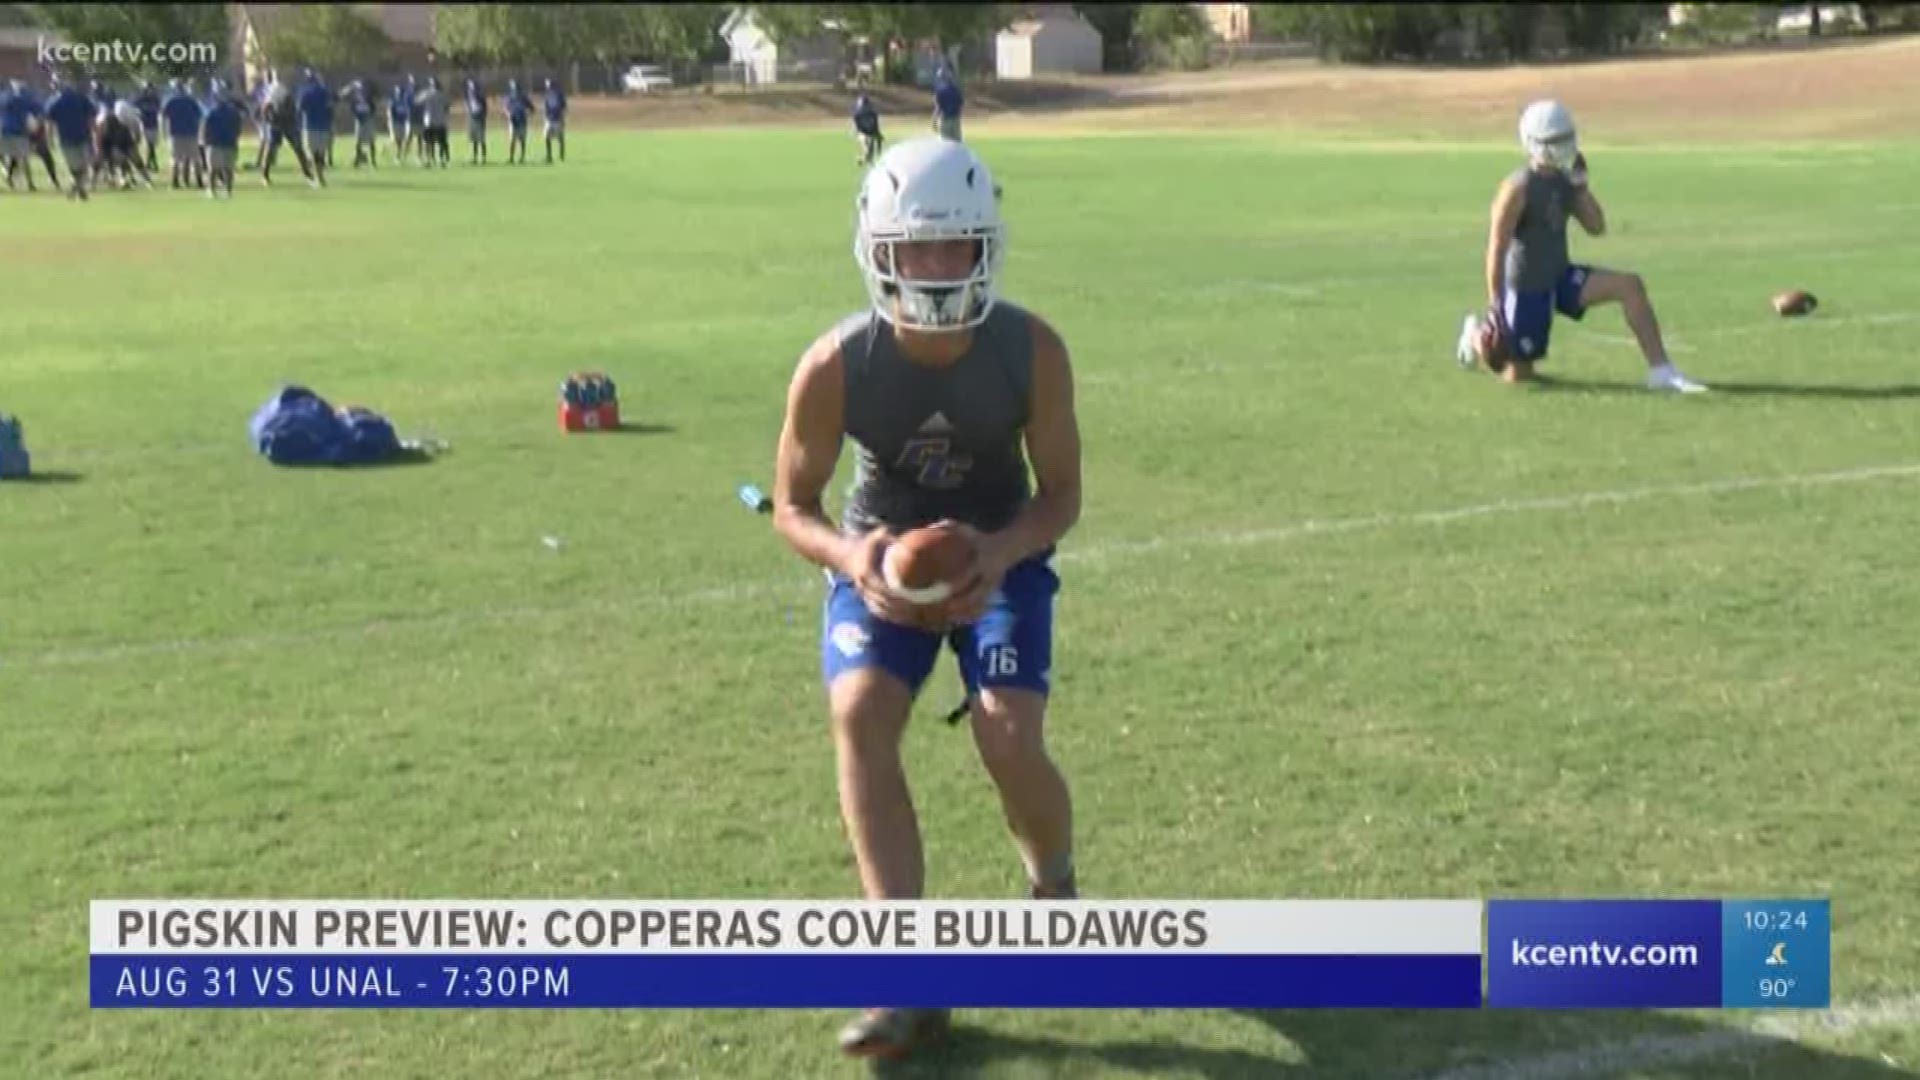 Pigskin Preview: Copperas Cove Bulldawgs